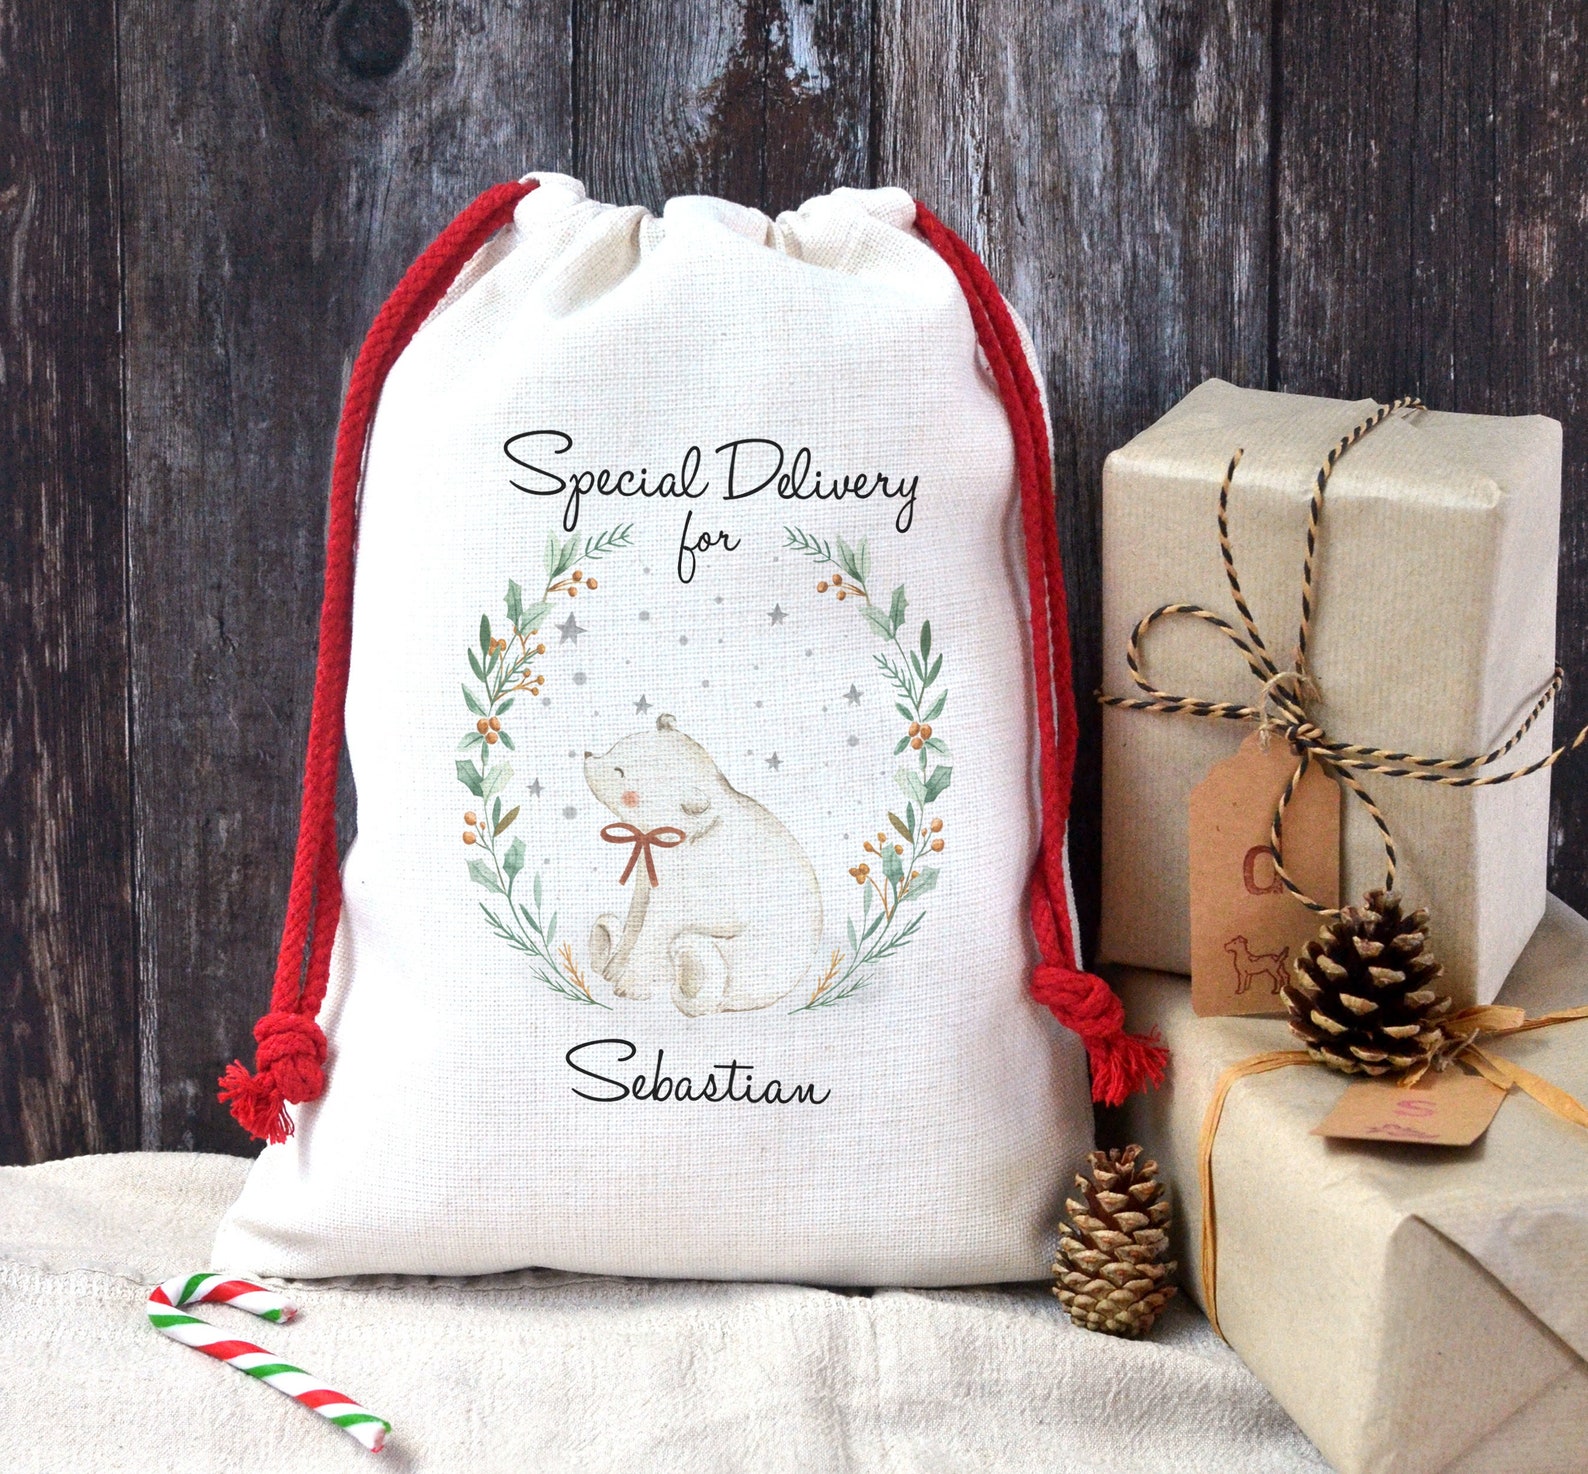 creative way to wrap child present at Christmas personalized Santa sack